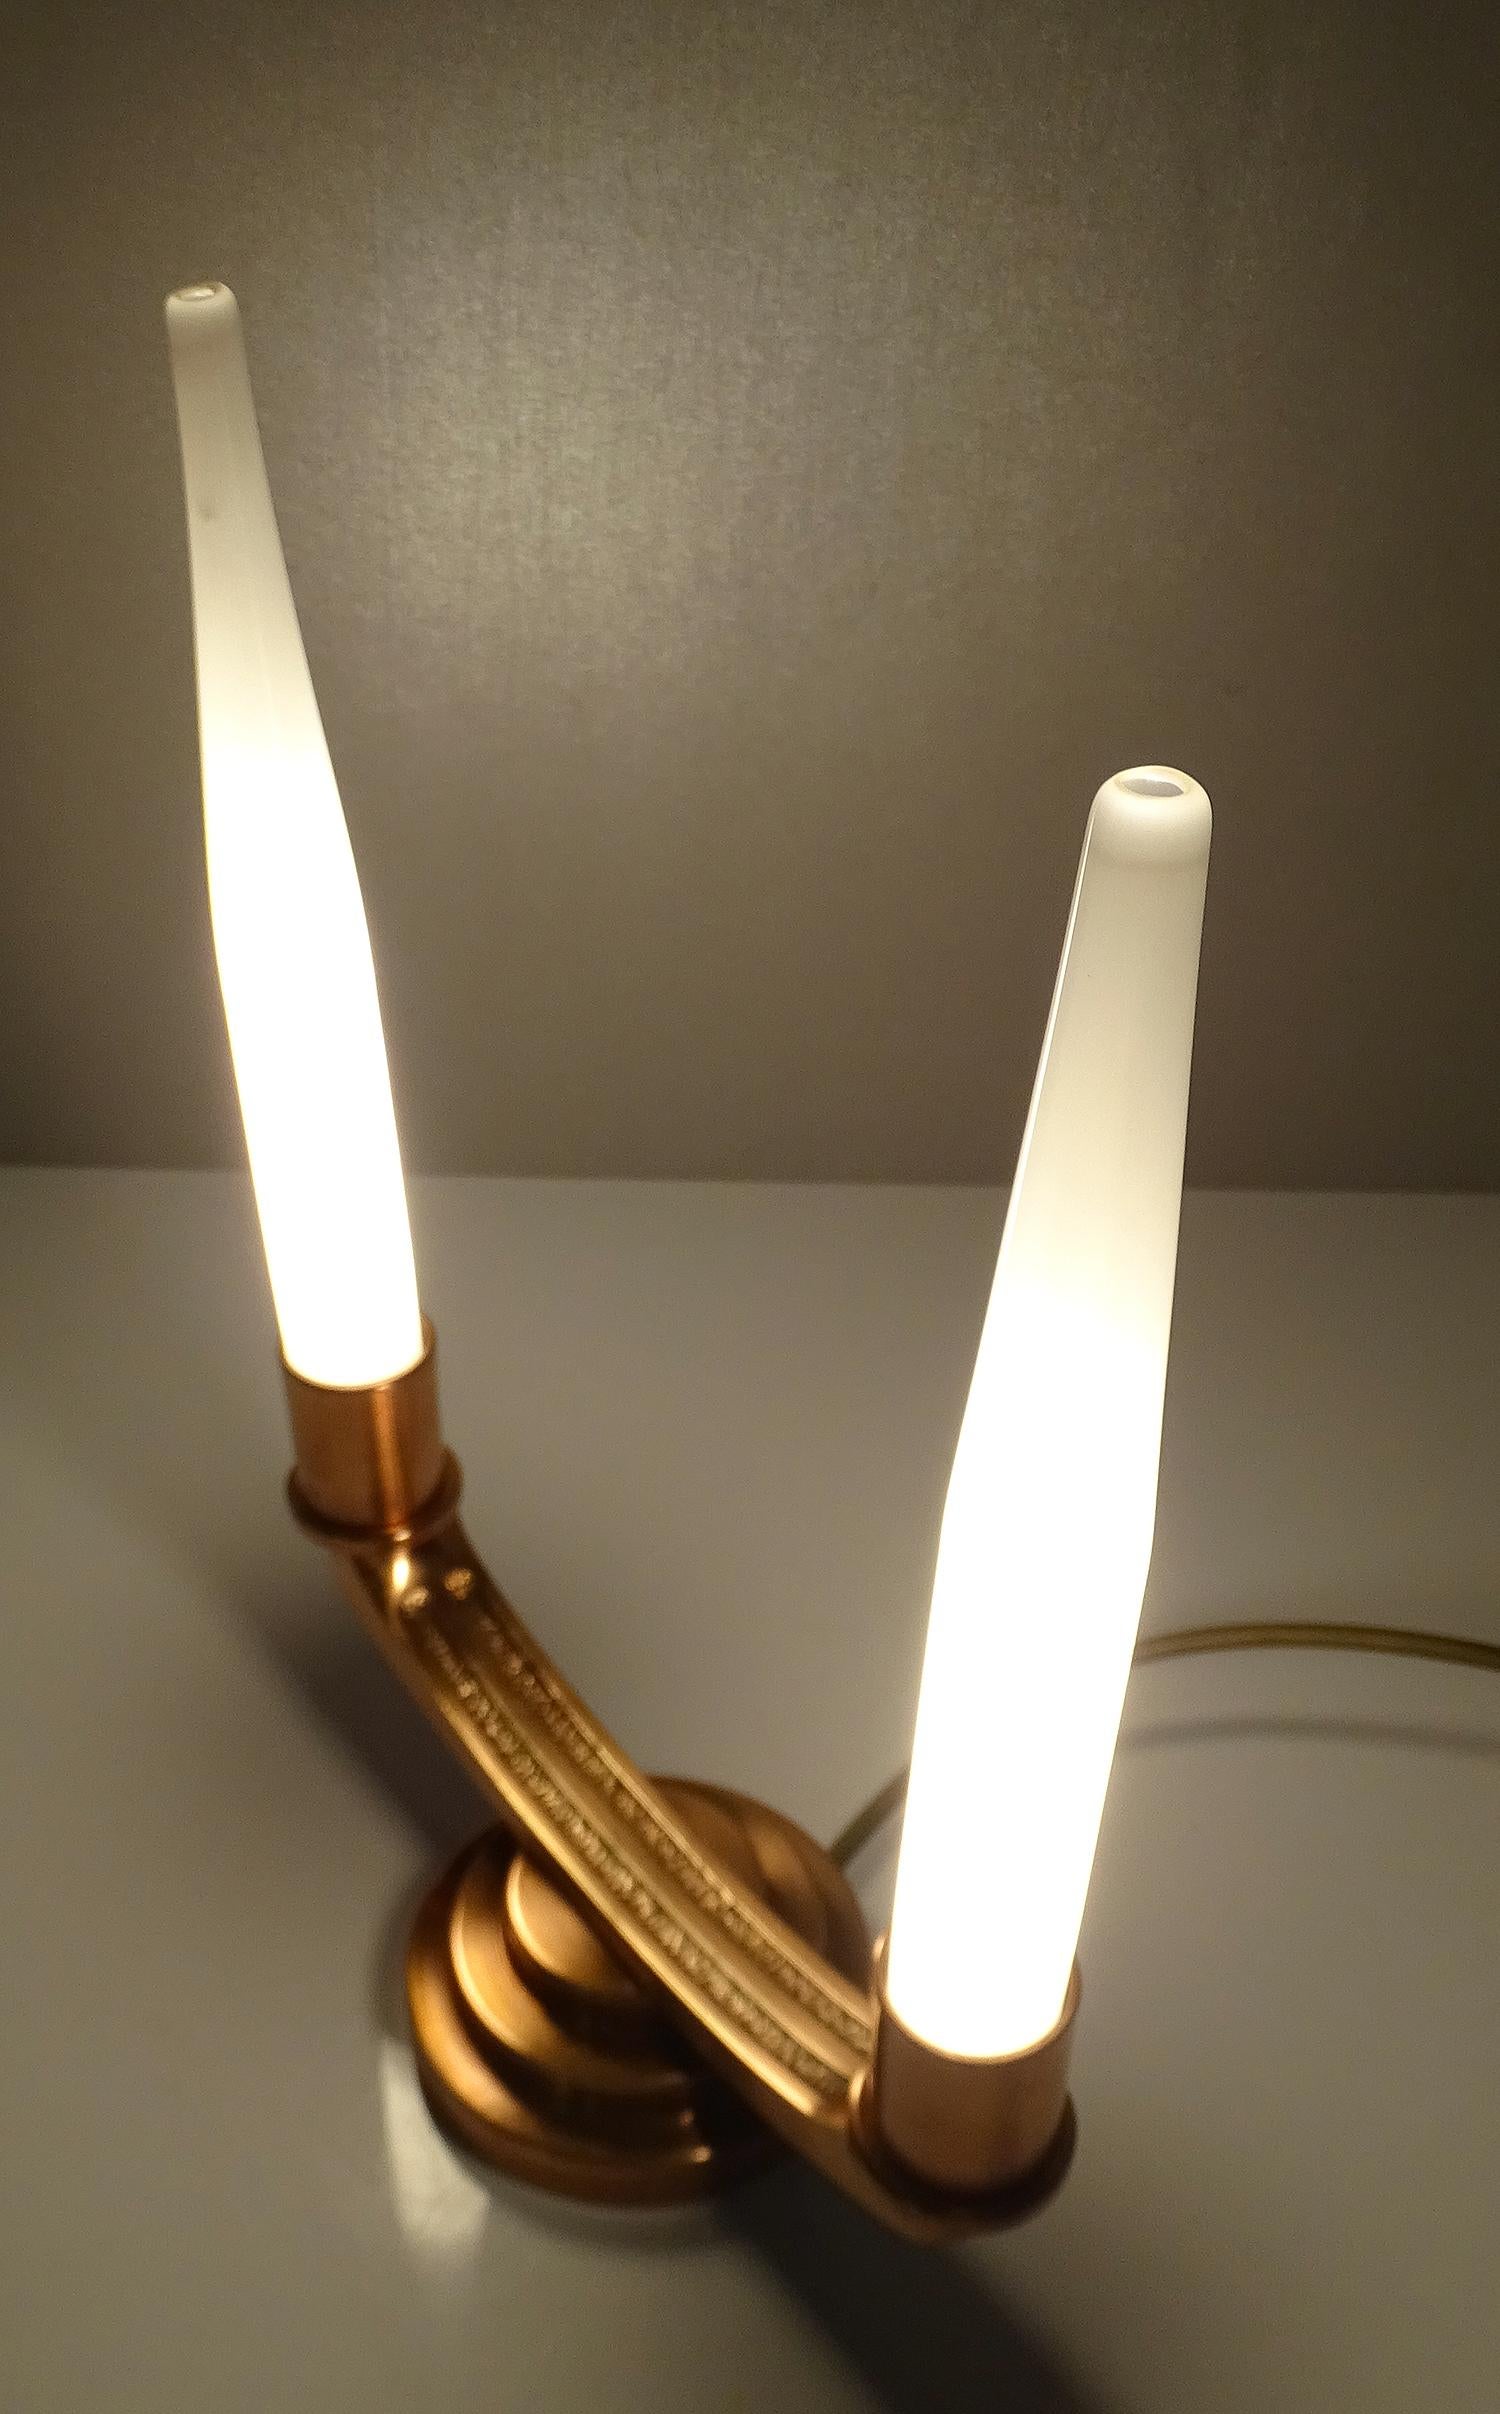 Pair of French Art Deco Modernist Uplighter  Lamps, Brass Copper Glass  Lights For Sale 8